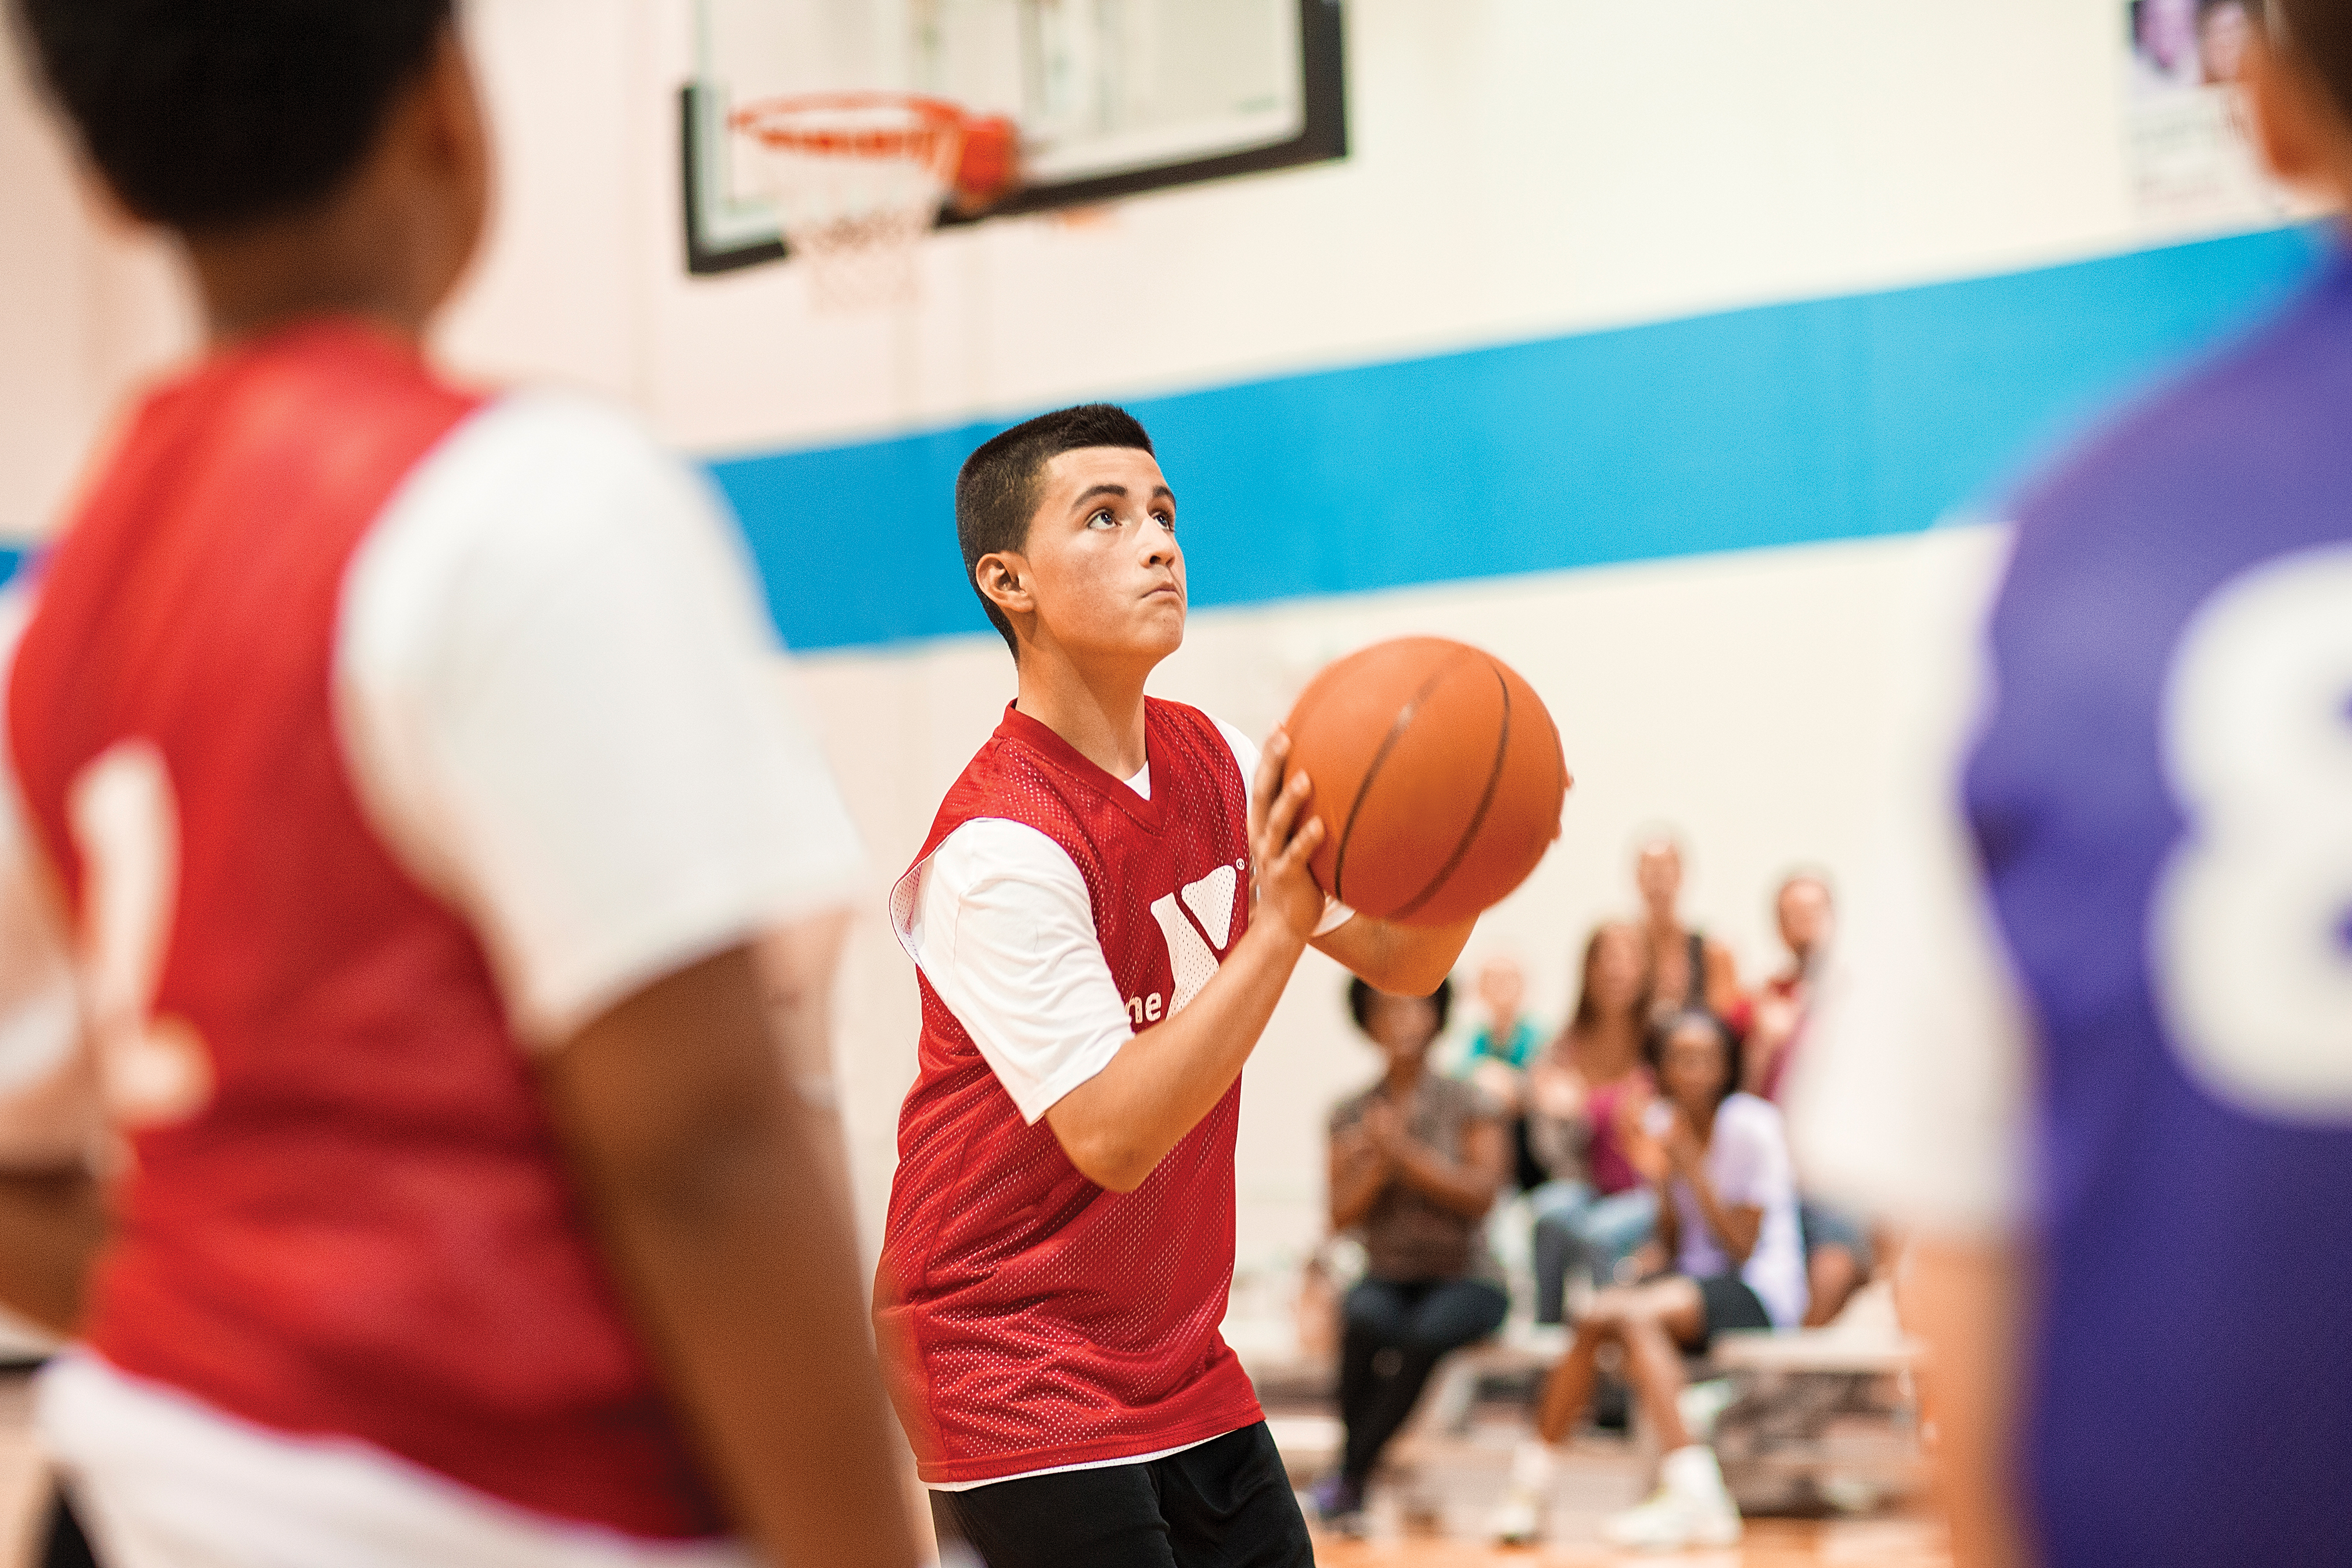 Boy shooting basketball with crowd in the background